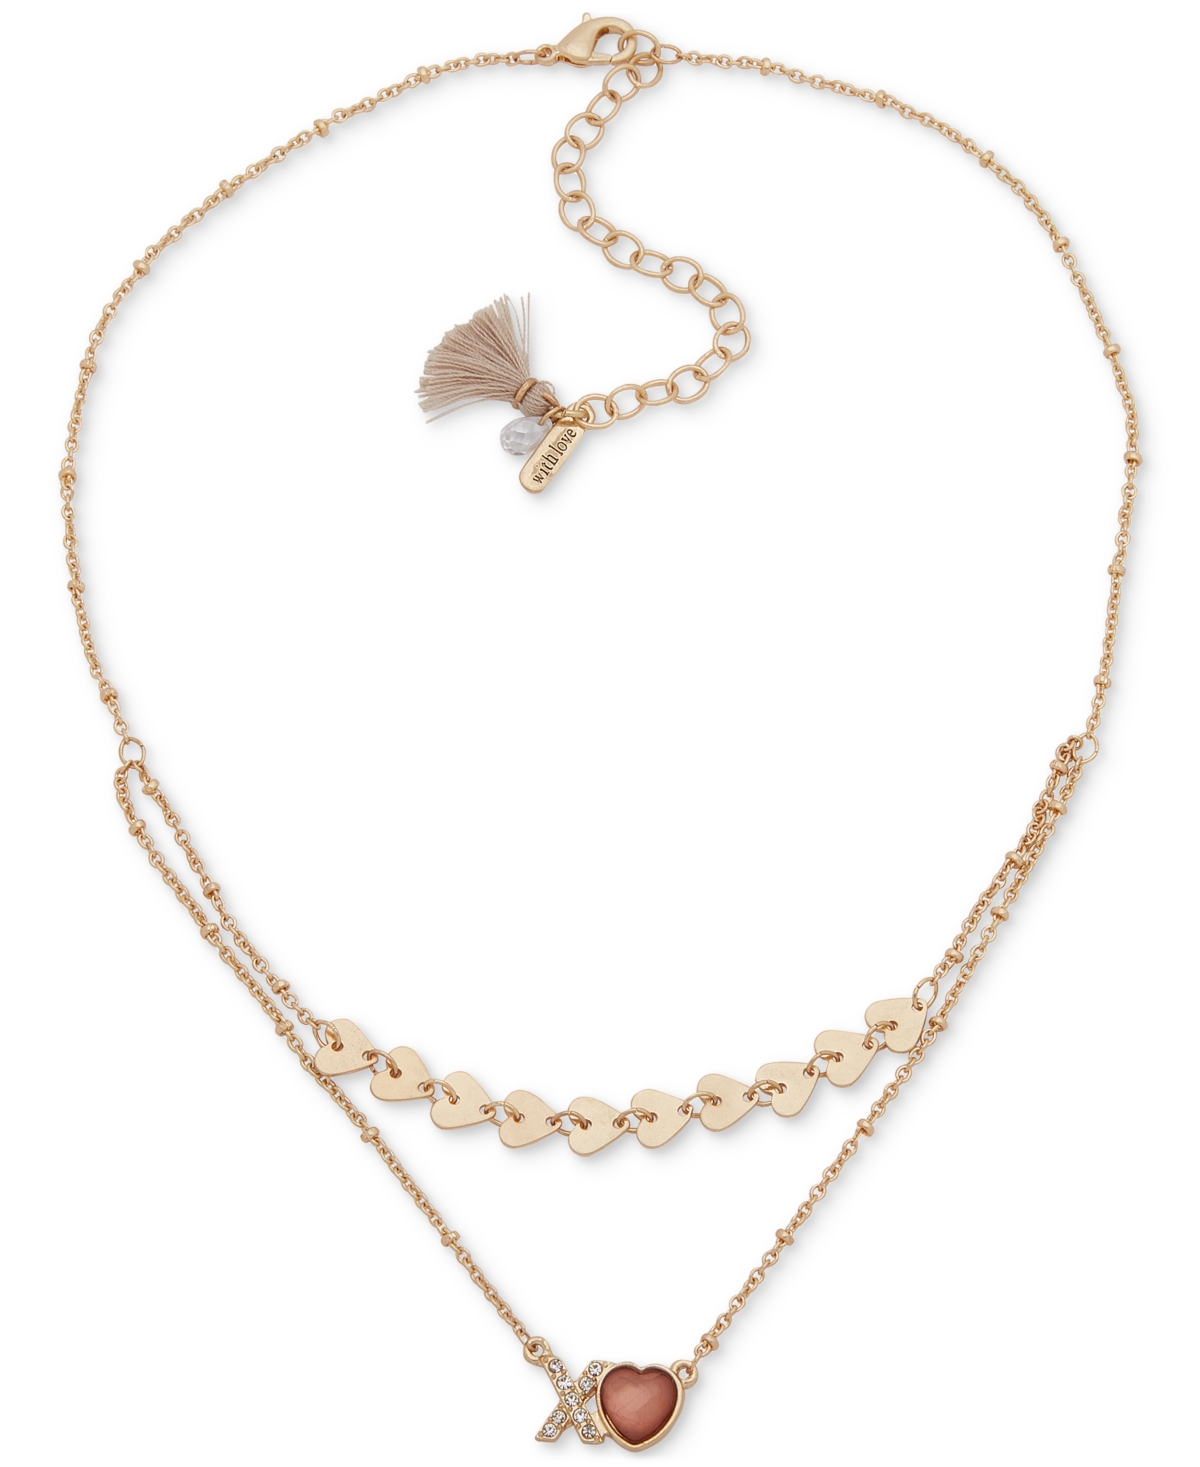 Lonna & Lilly Gold-tone Mixed Stone Xo Heart Layered Statement Necklace, 16" + 3" Extender In Pink